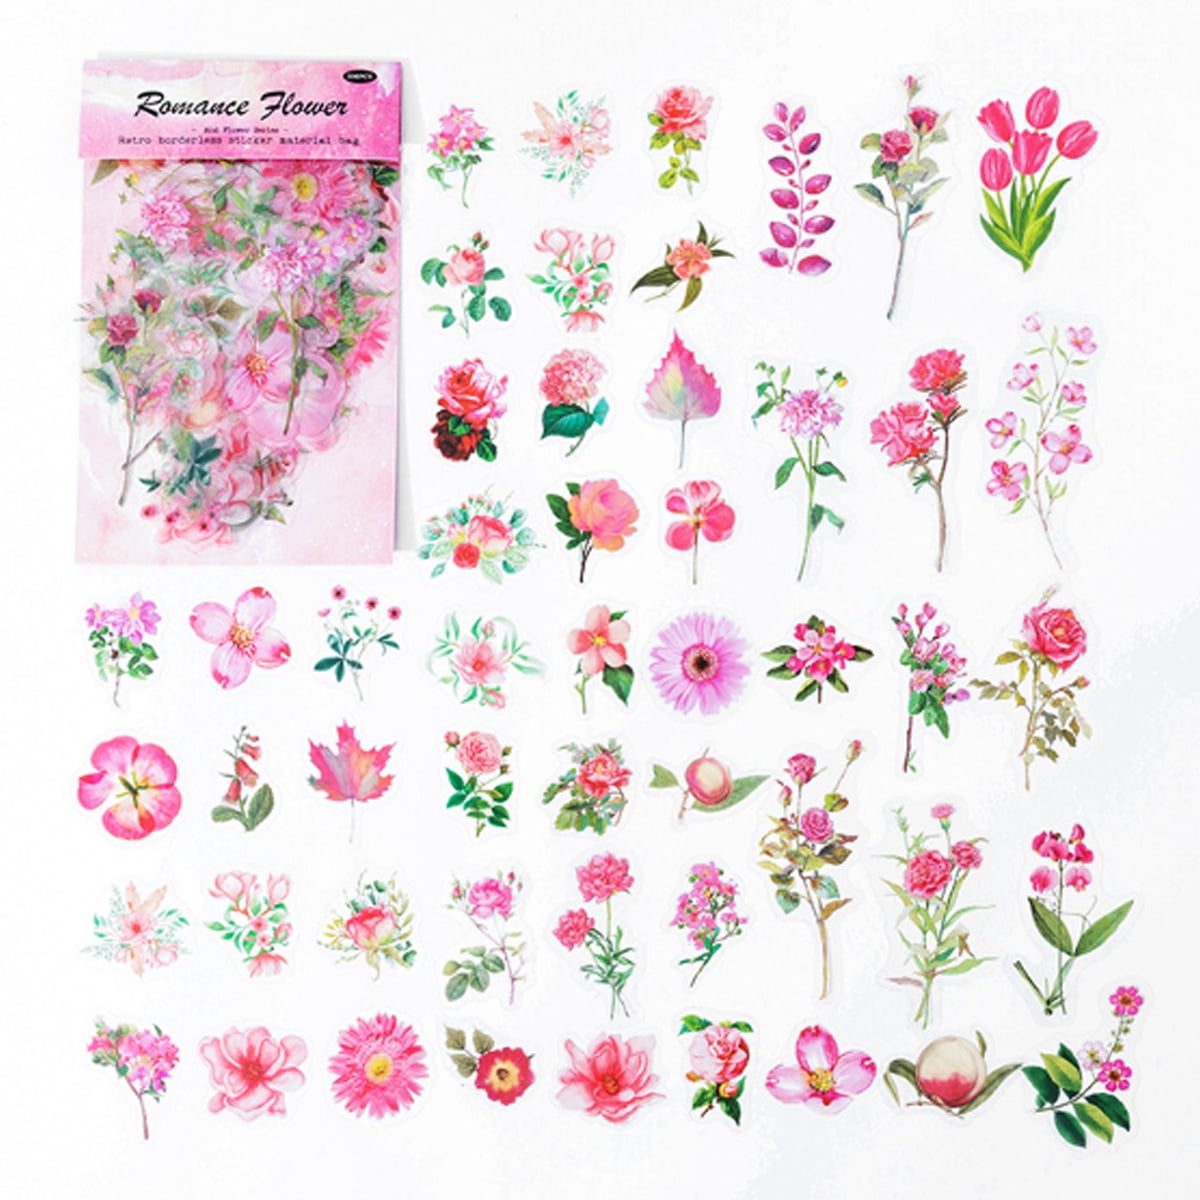 NOGAMOGA 80 Pcs Natural Flower Stickers for Scrapbooking, Vintage Plants Flowers Collection Big Size Waterproof Stickers for Scrapbook, Journaling